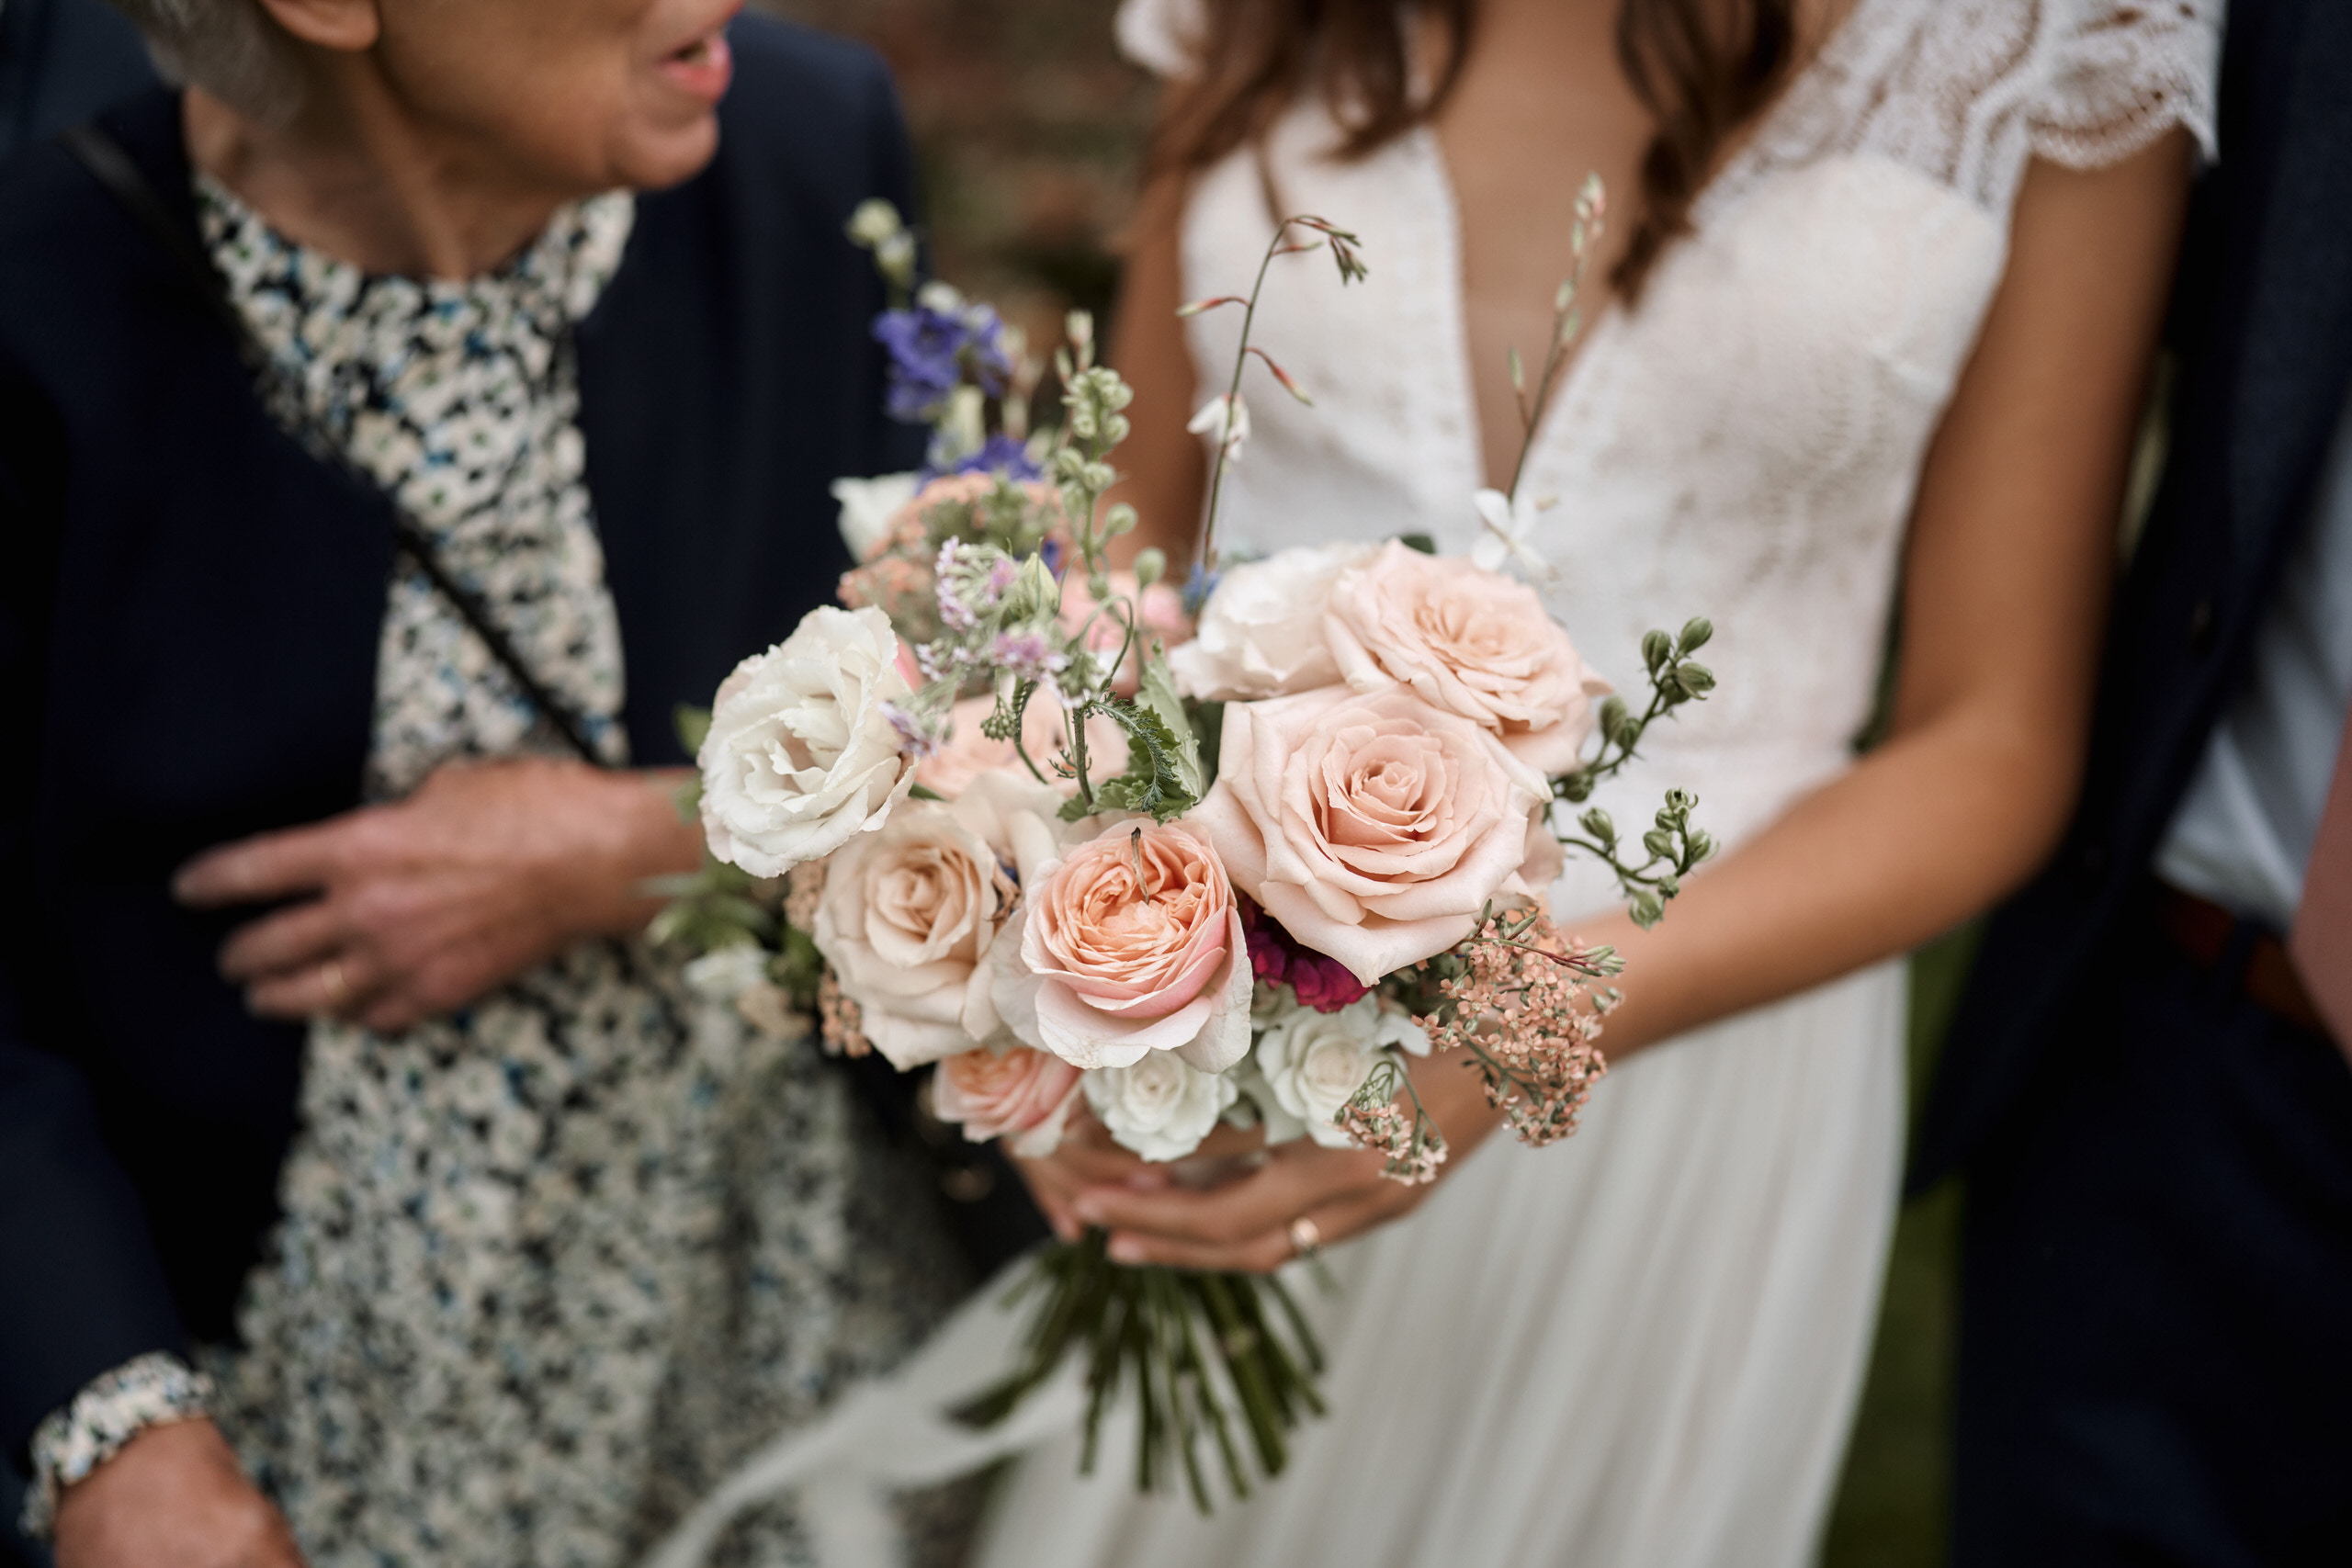 A woman is holding flowers in front of an older lady.